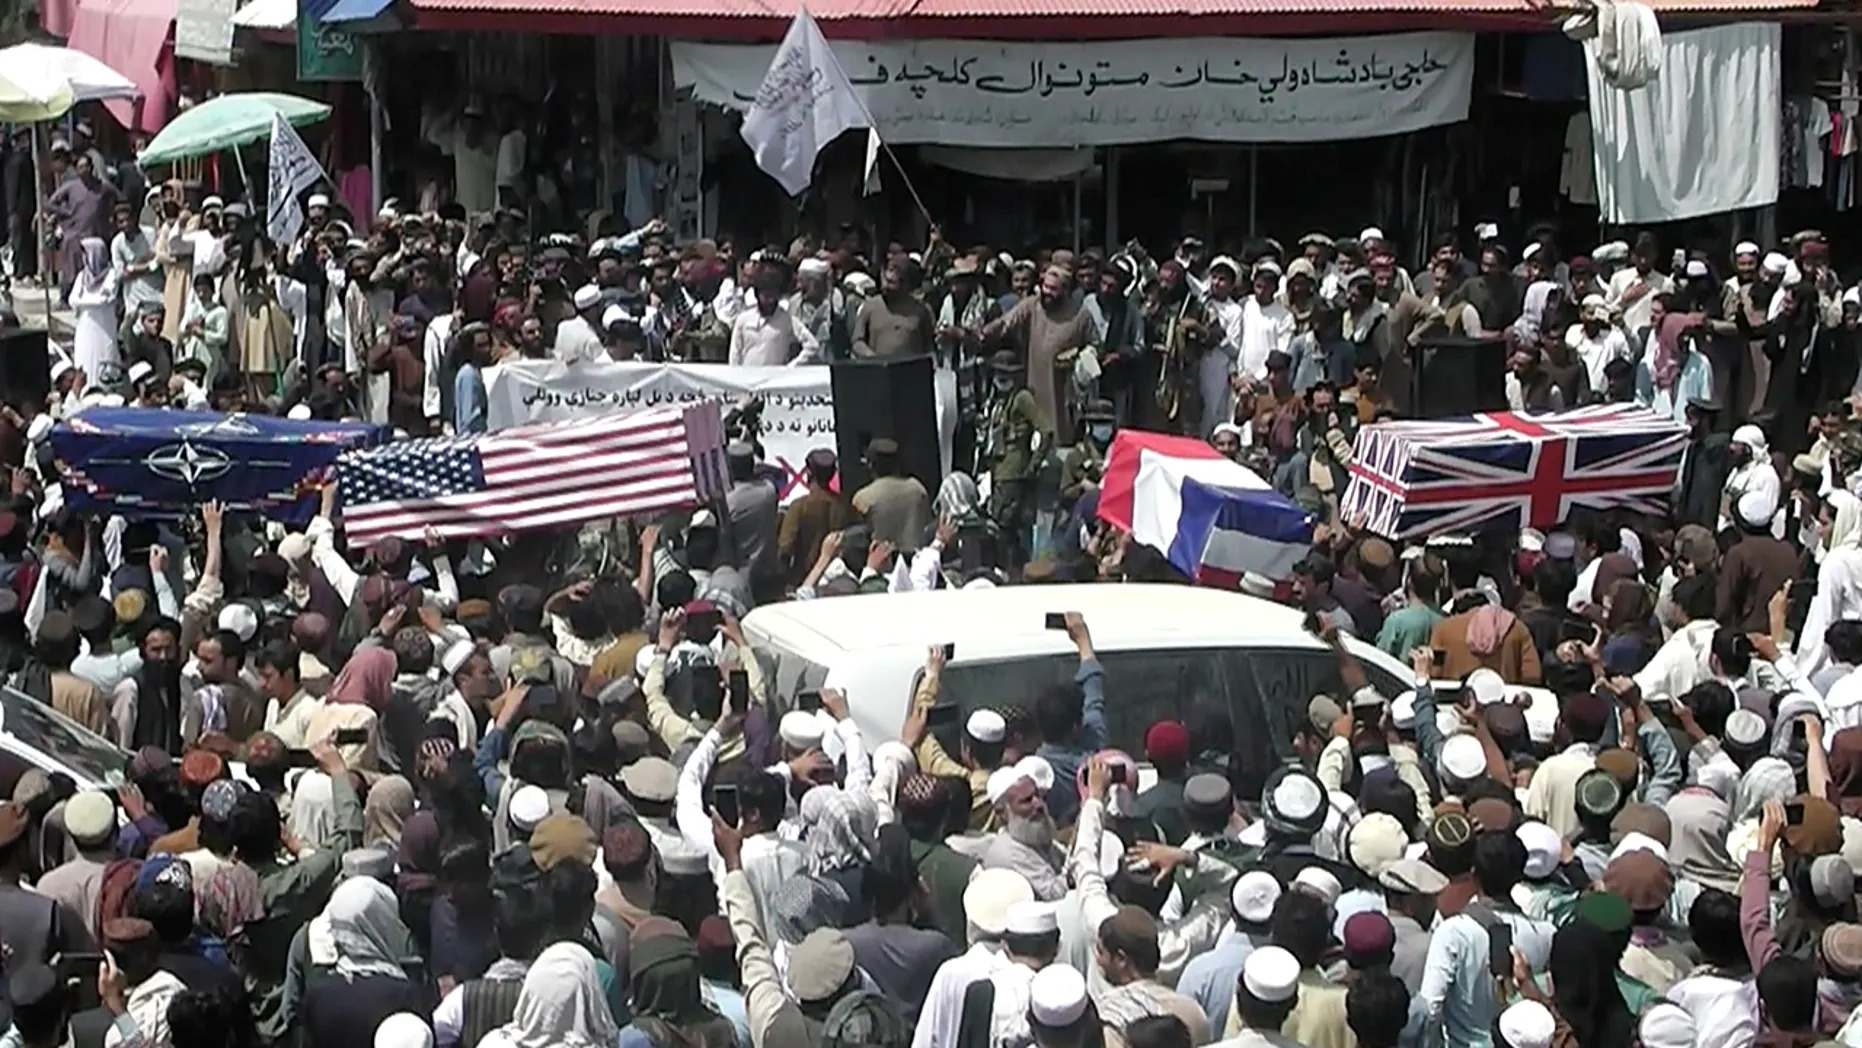 Taliban celebrates with mock funerals for US, Allies